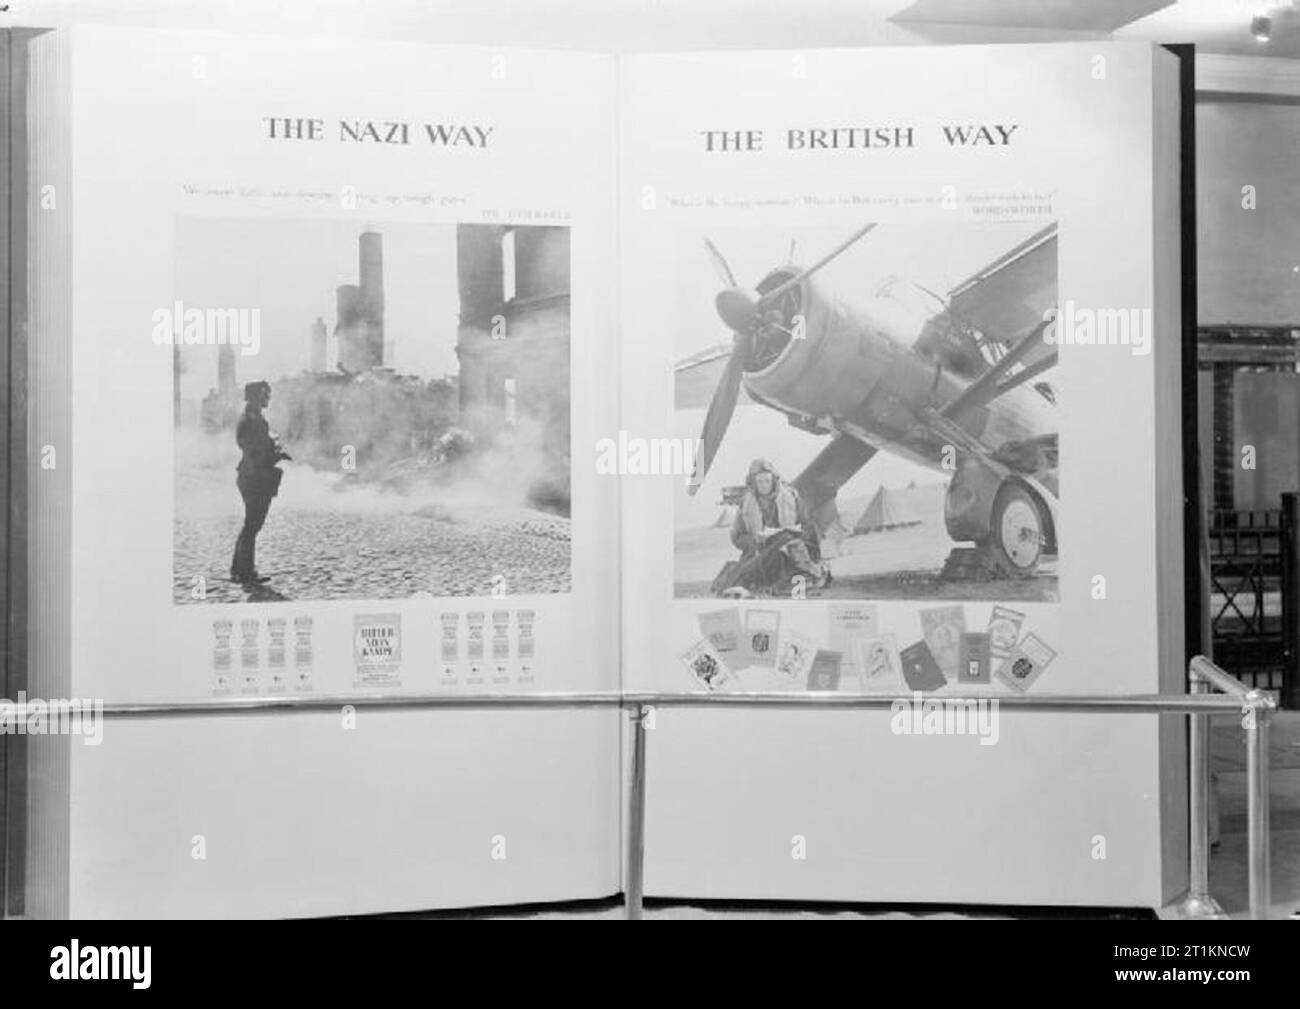 Ministry of Information Exhibitions during the Second World War, London, England, UK, 1940 A view of one of the display panels at the 'Books and Freedom' exhibition, organised by the National Book Council, at Charing Cross underground station. The display is a comparison of 'The Nazi Way' (a photograph of a German soldier amidst destruction, below which is a row of copies of 'Mein Kampf') and 'The British Way' (an airman reading beside his aircraft, below which is a selection of various different 'classic' books). Stock Photo